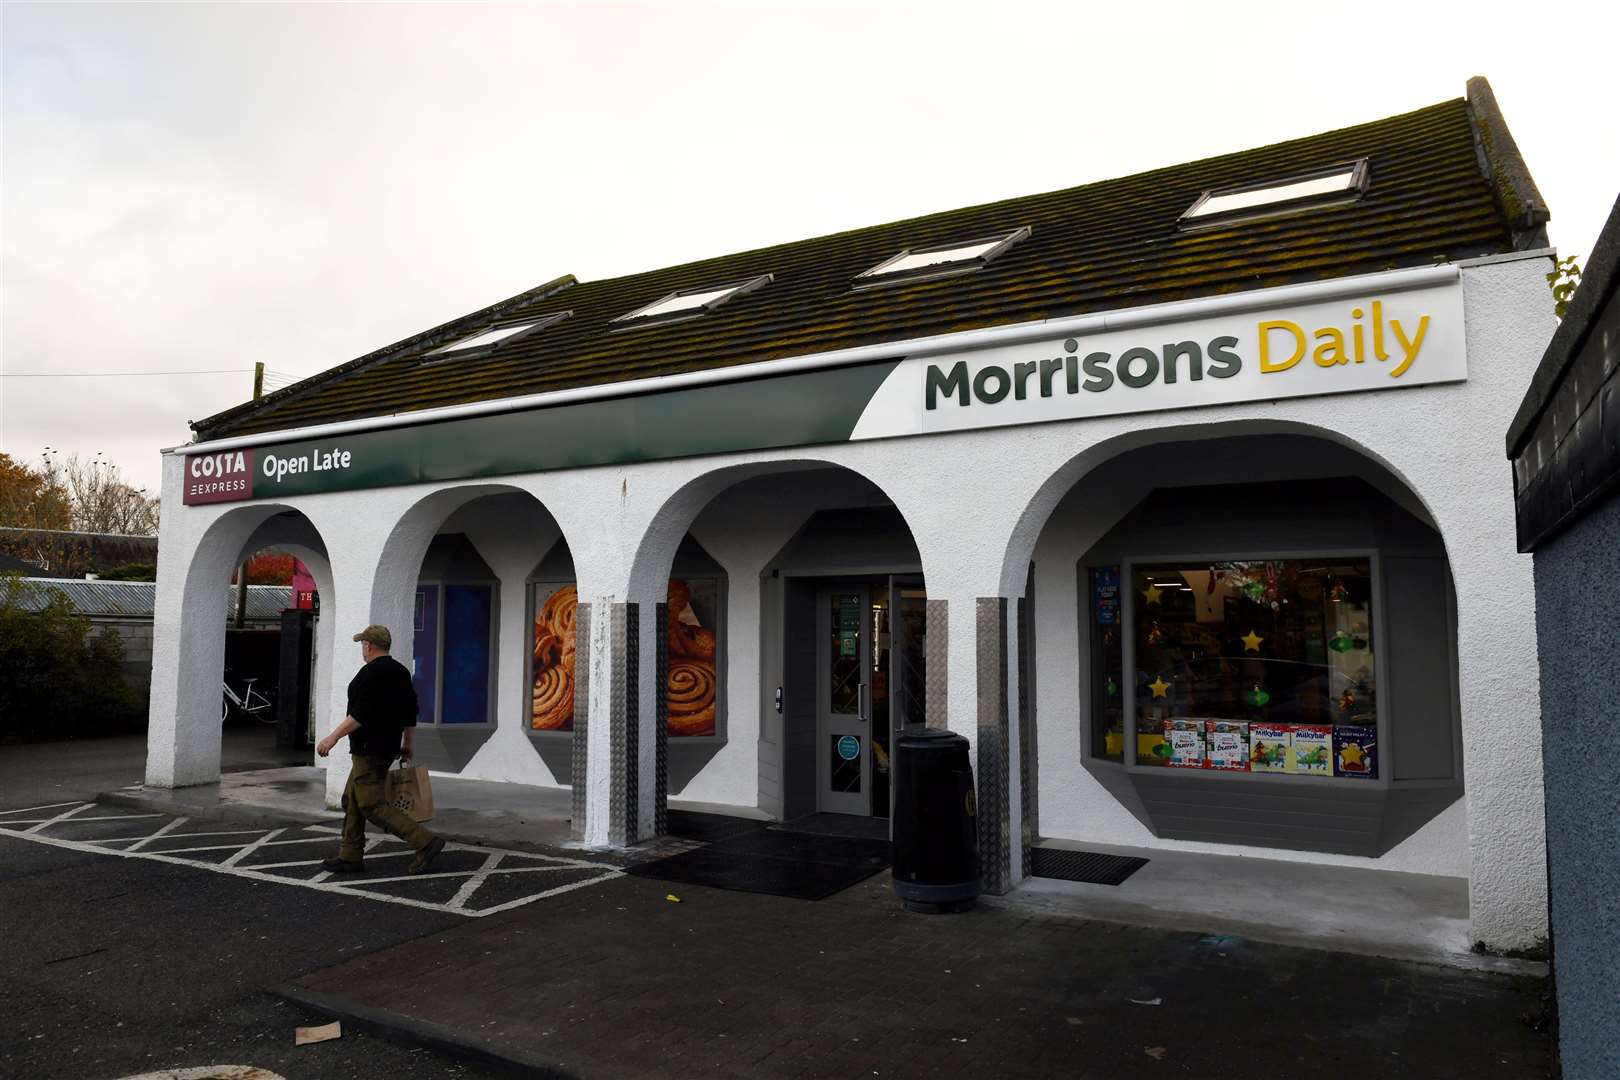 Morrisons Daily on Culcabock Road locator. Picture: James Mackenzie.